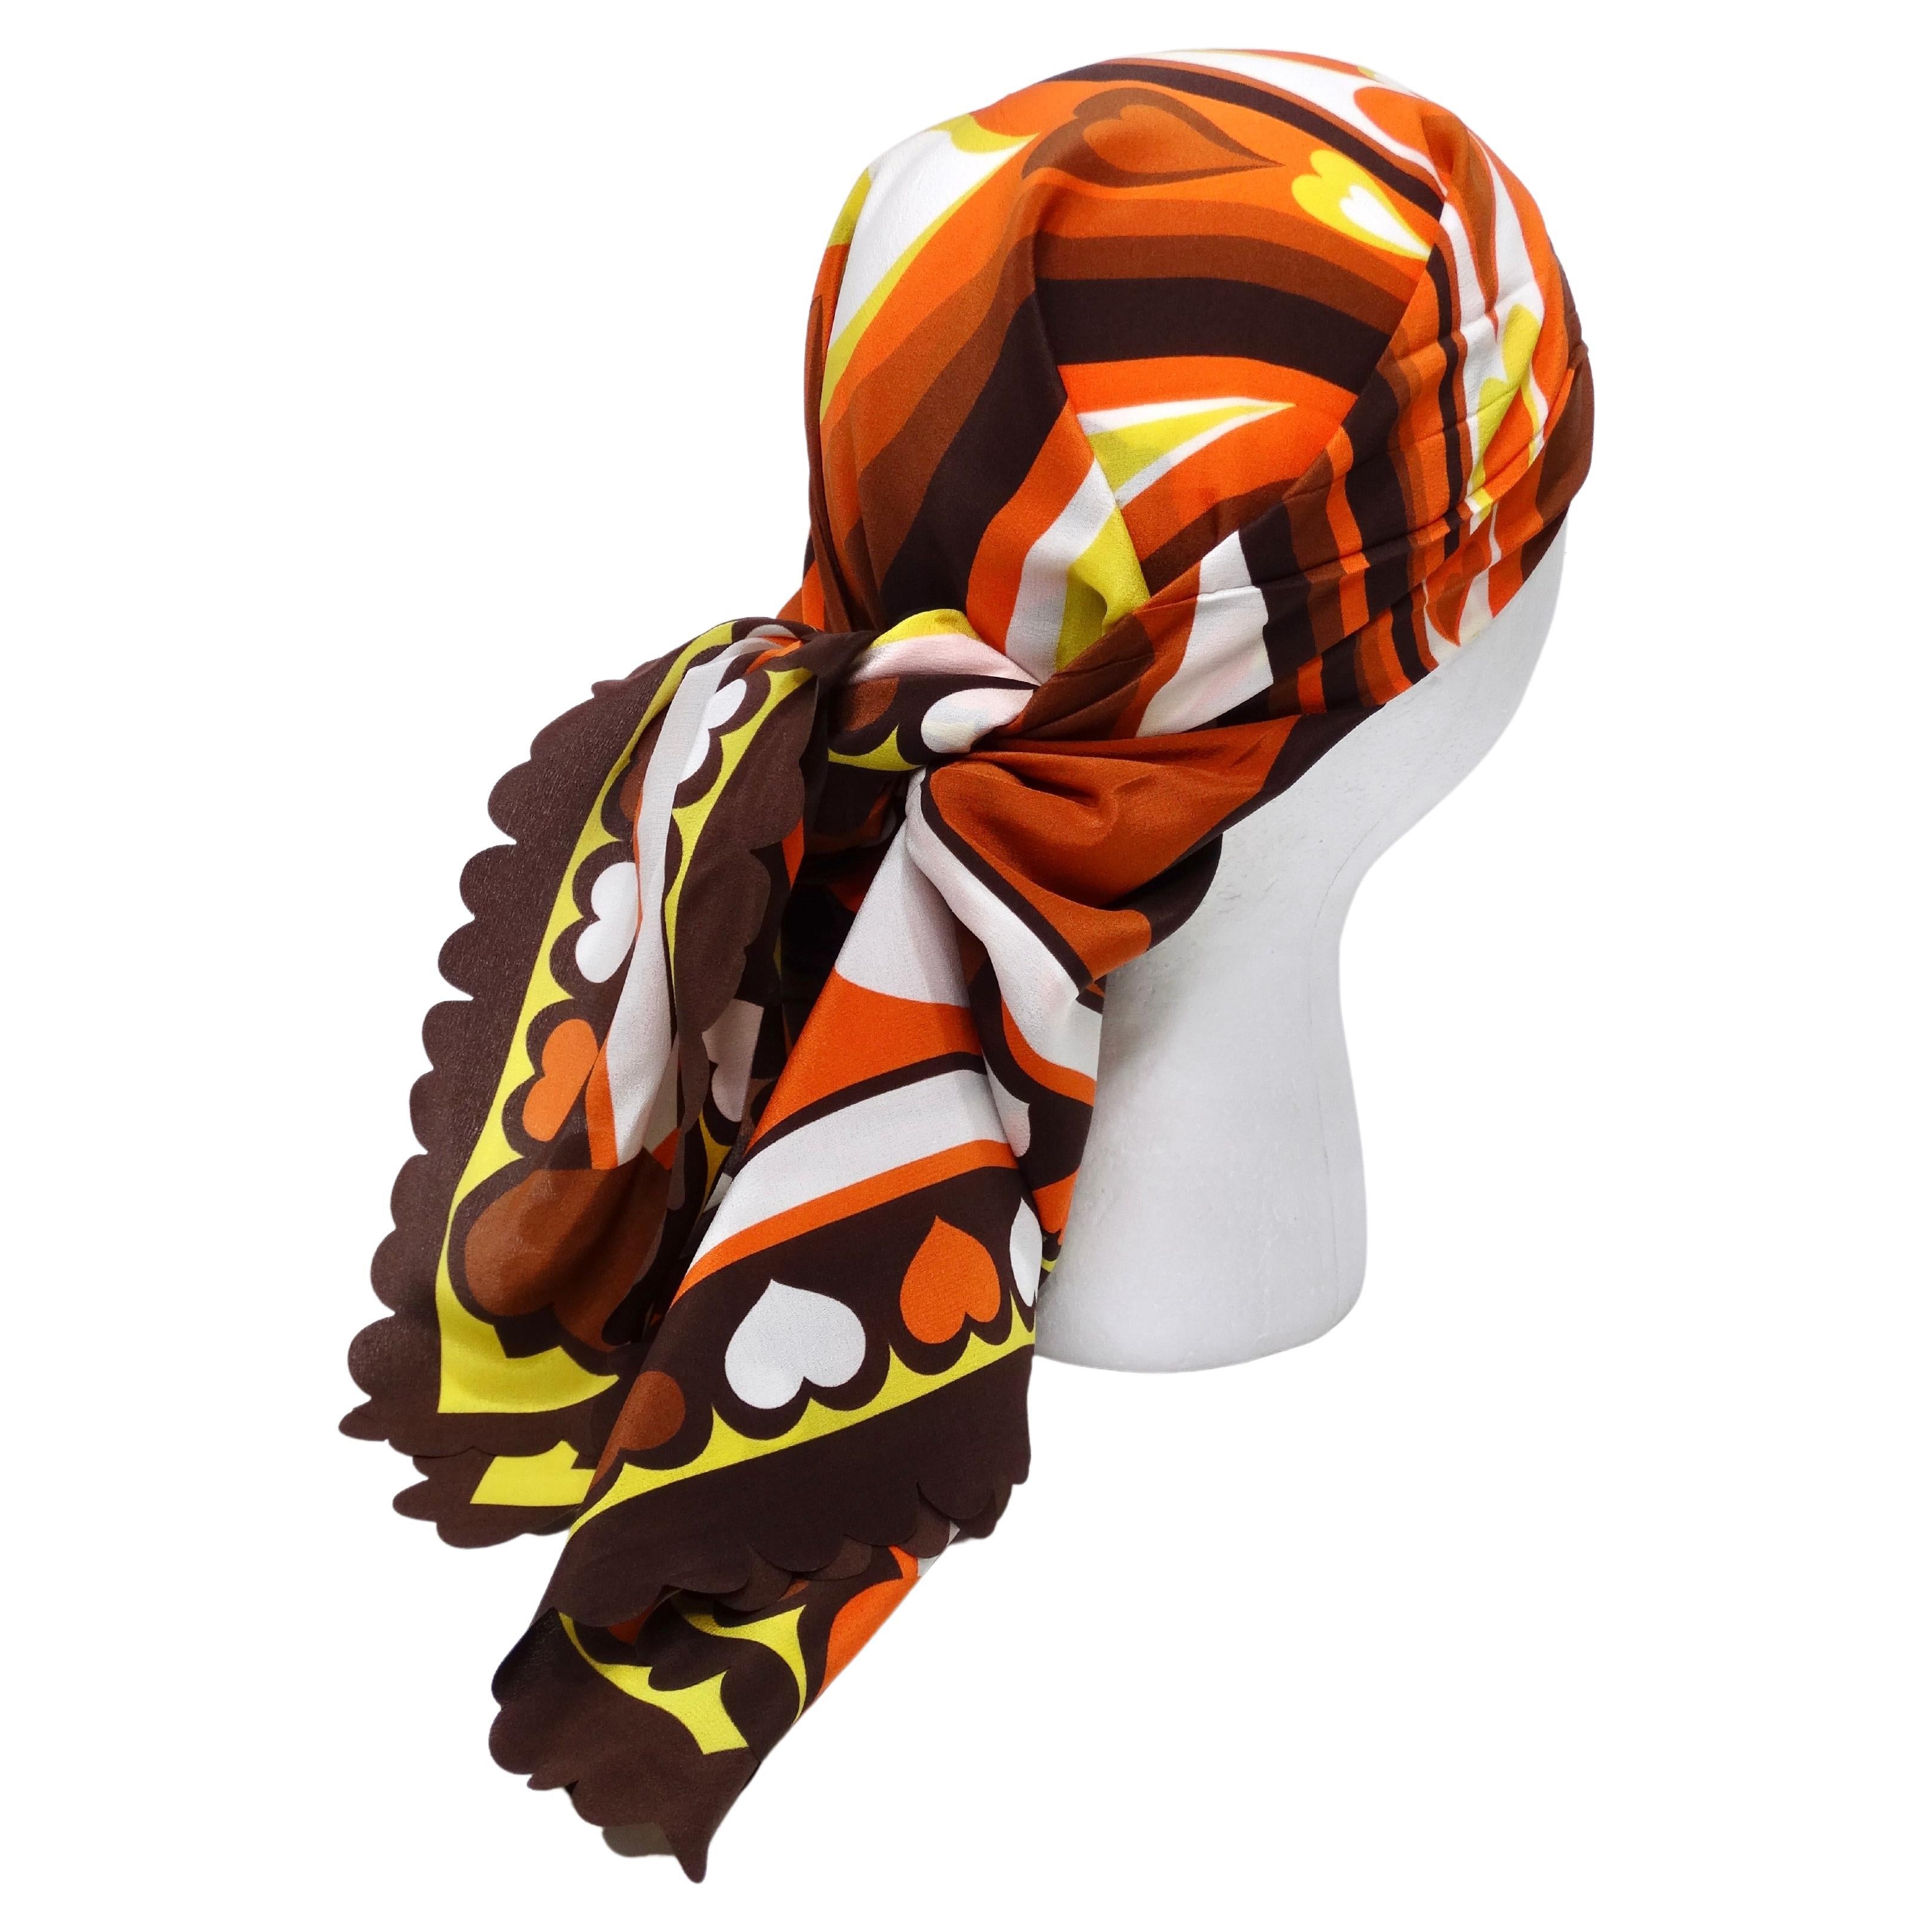 Snag this cute and fun Moschino Boutique scarf today! This scarf has an Olive Oyl print with super fun scalloped edged and a groovy heart print in a combination of browns and oranges. The border of this scarf is in small hearts and showcases the